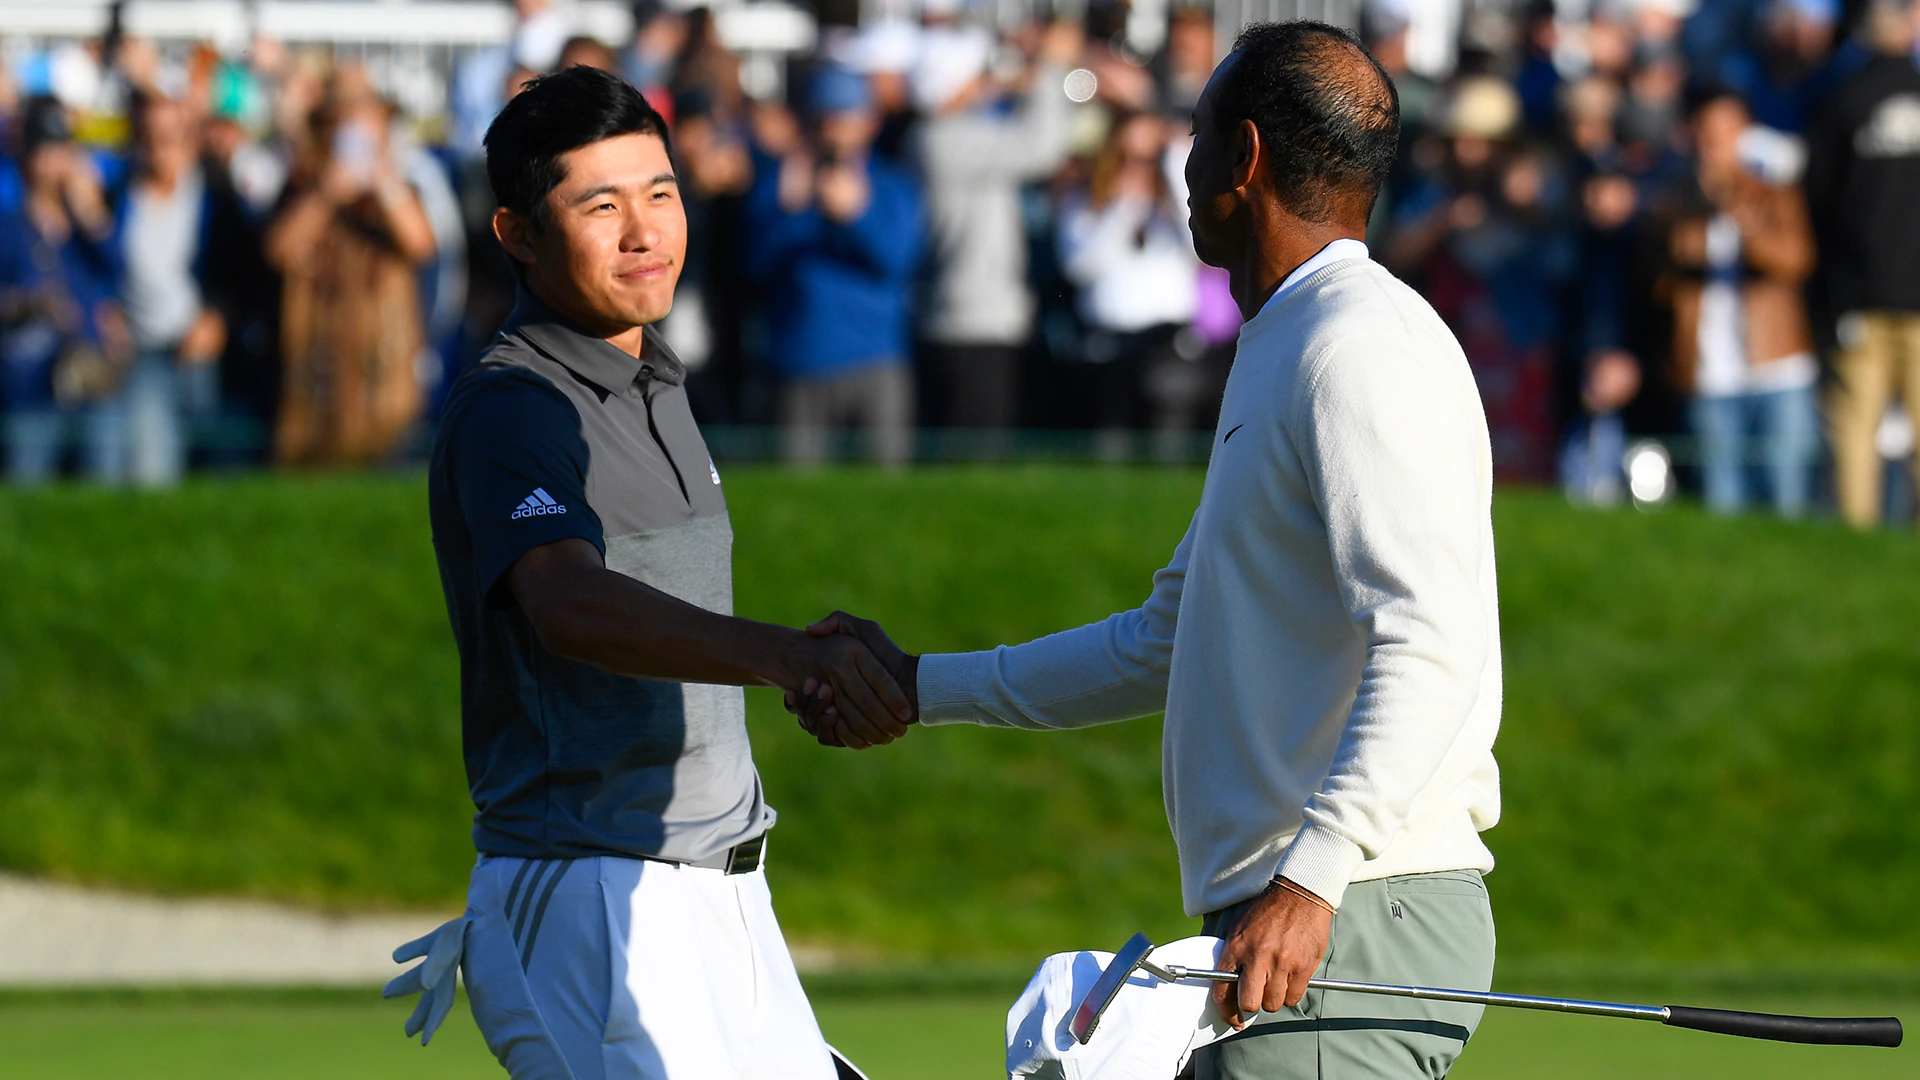 Collin Morikawa’s goal is to break this Tiger Woods record